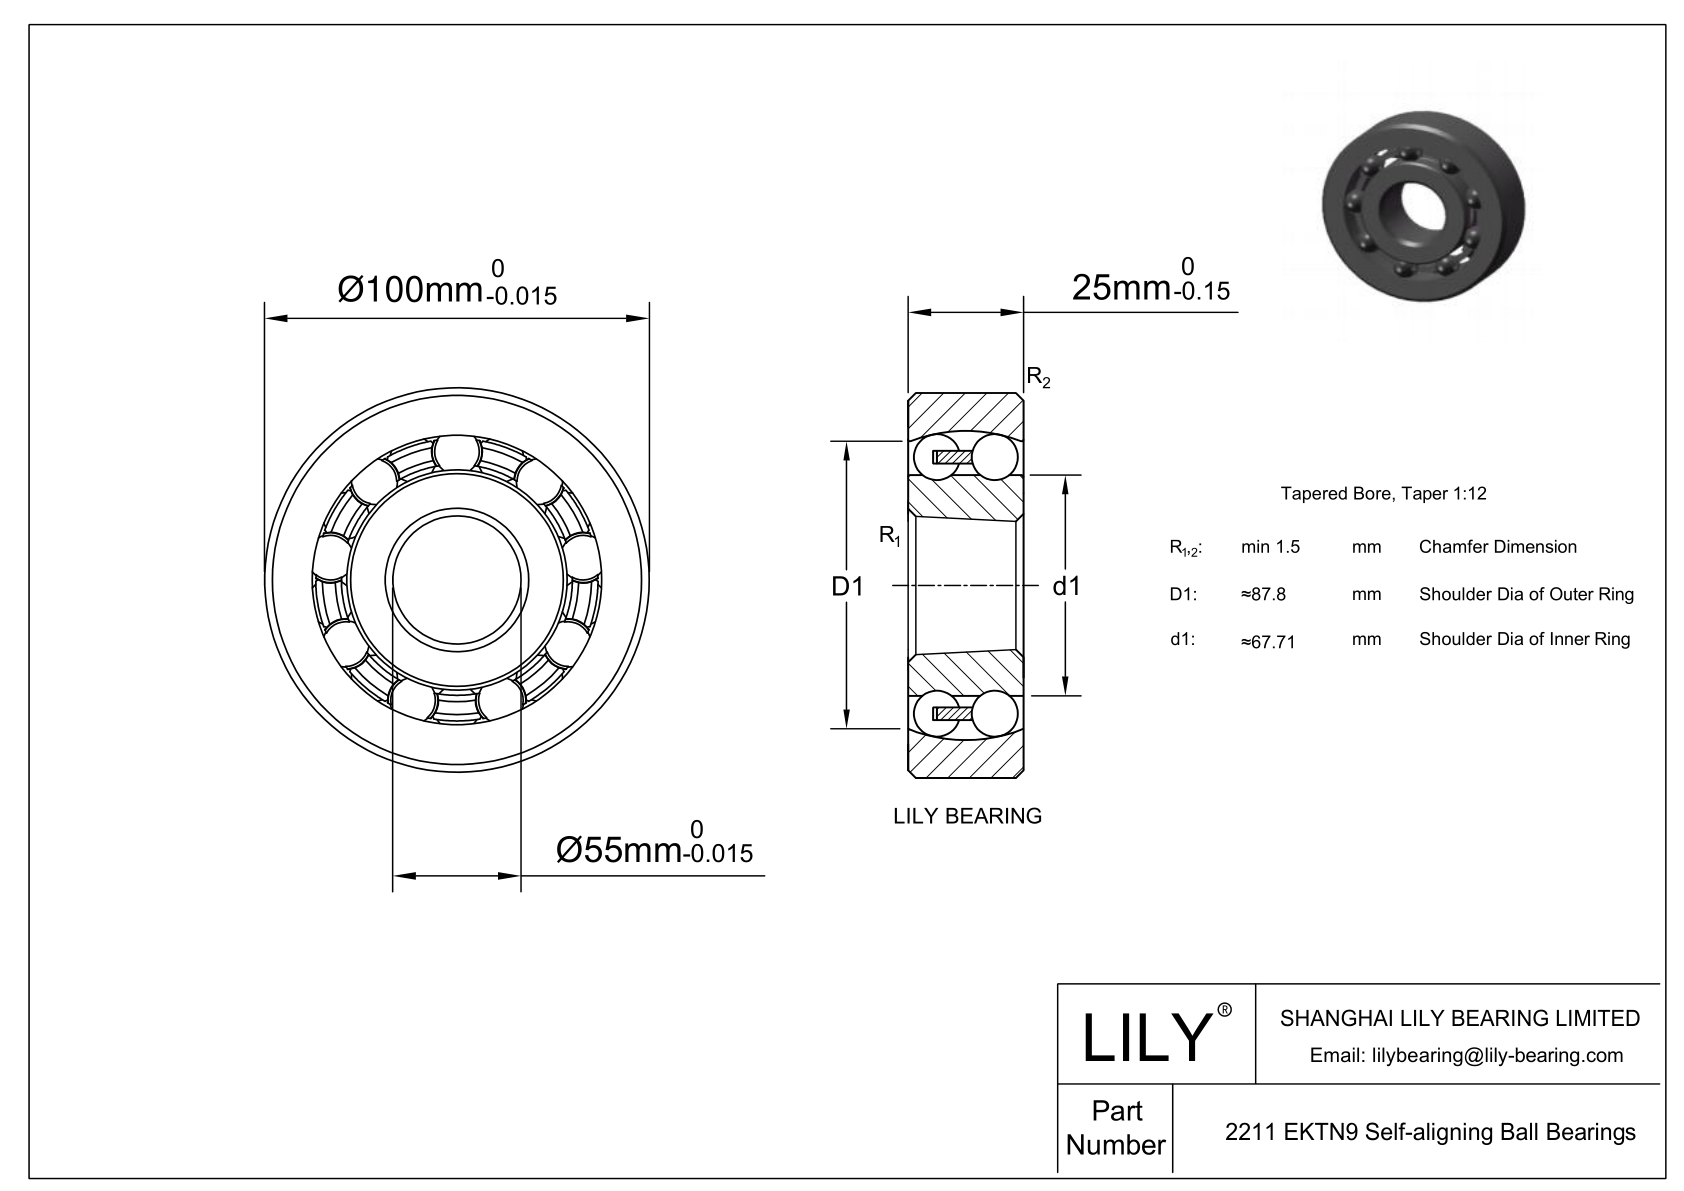 CE2211SC Silicon Carbide Self Aligning Ball Bearings cad drawing